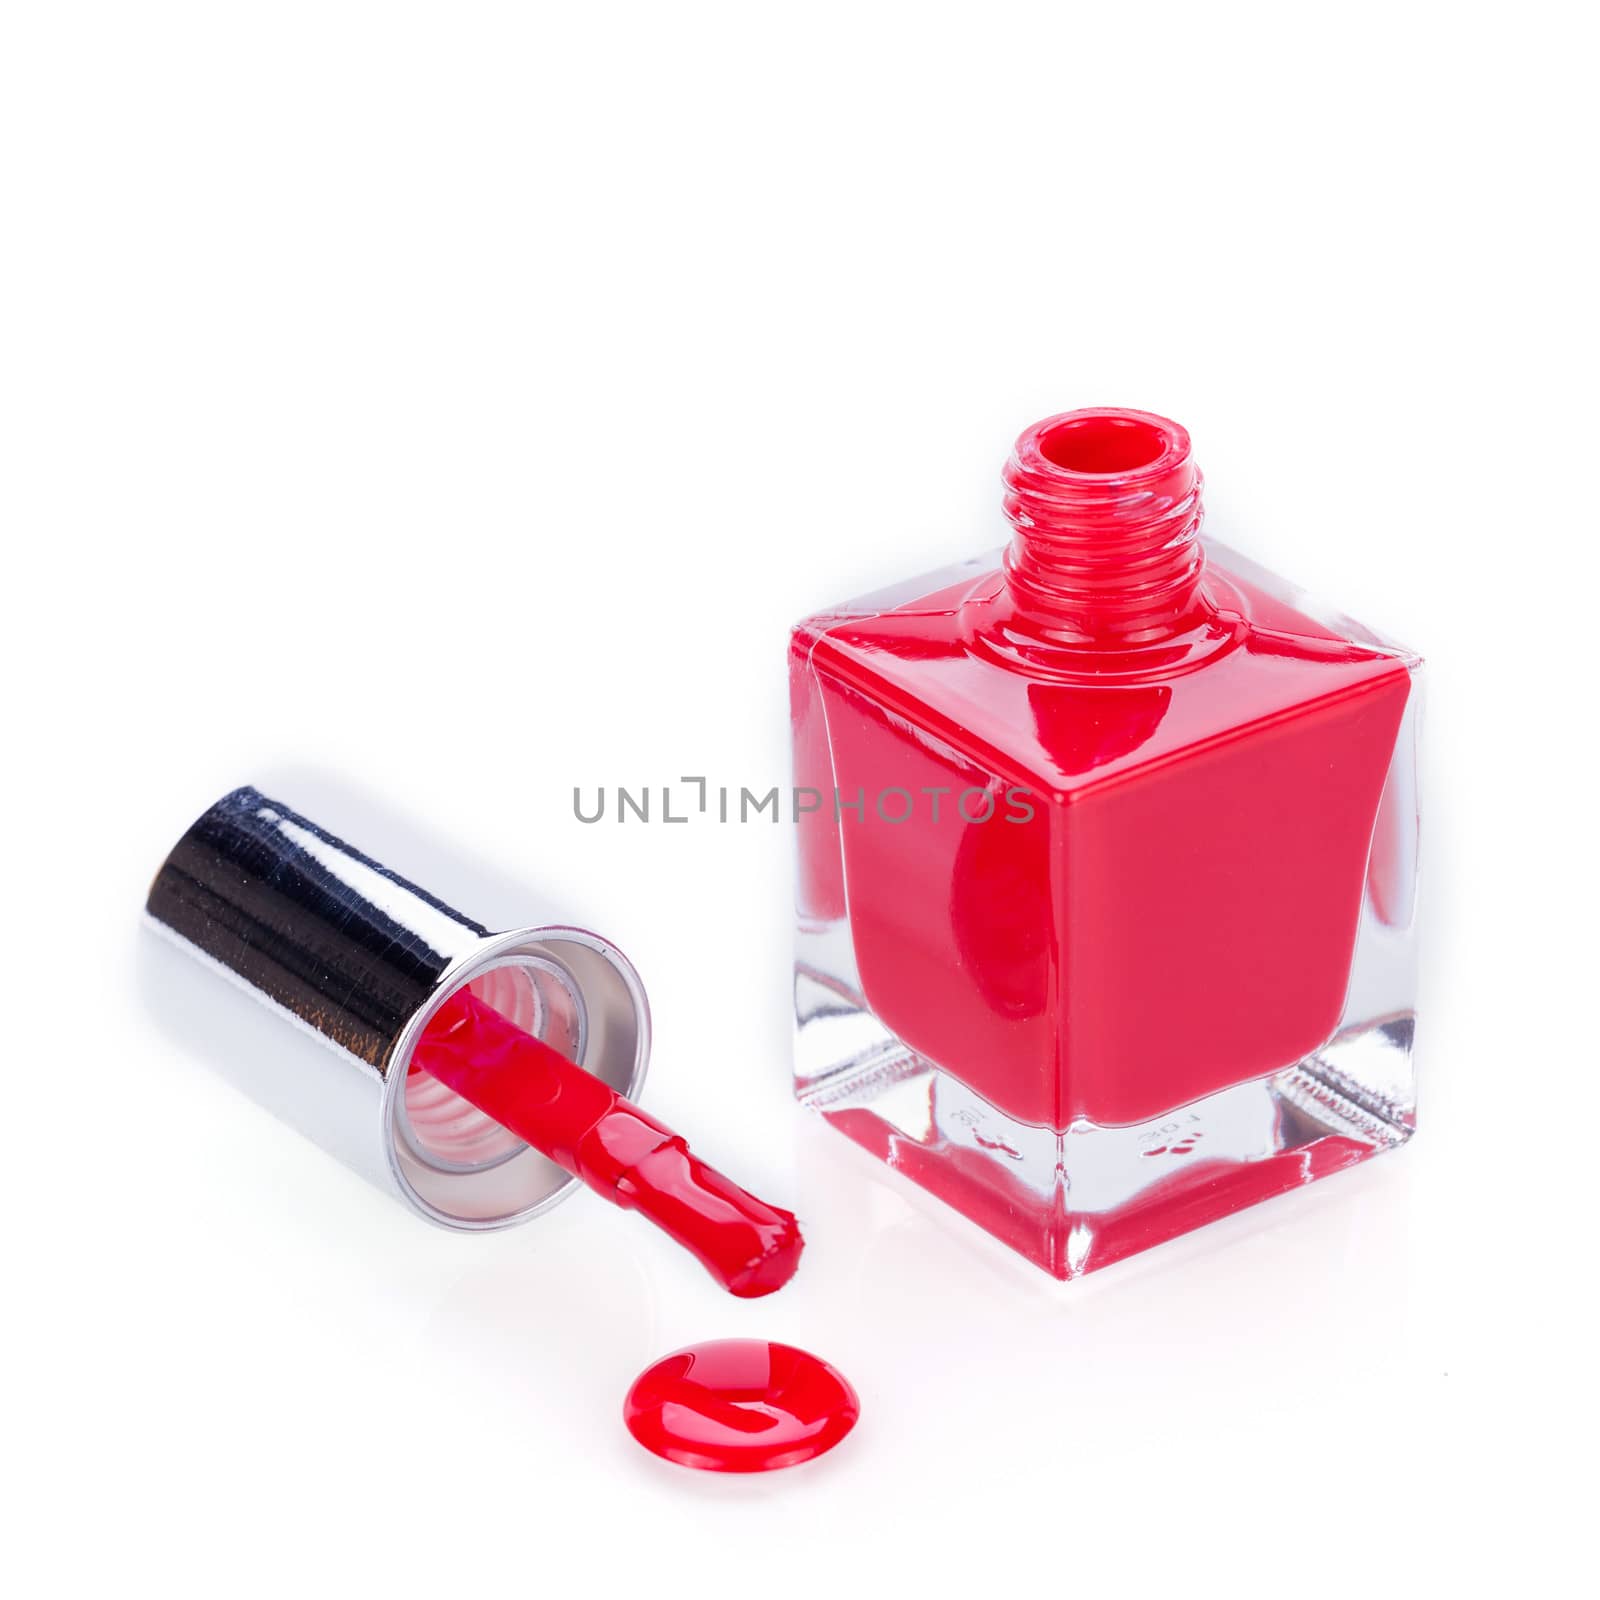 Modern stylish red nail varnish or lacquer by juniart